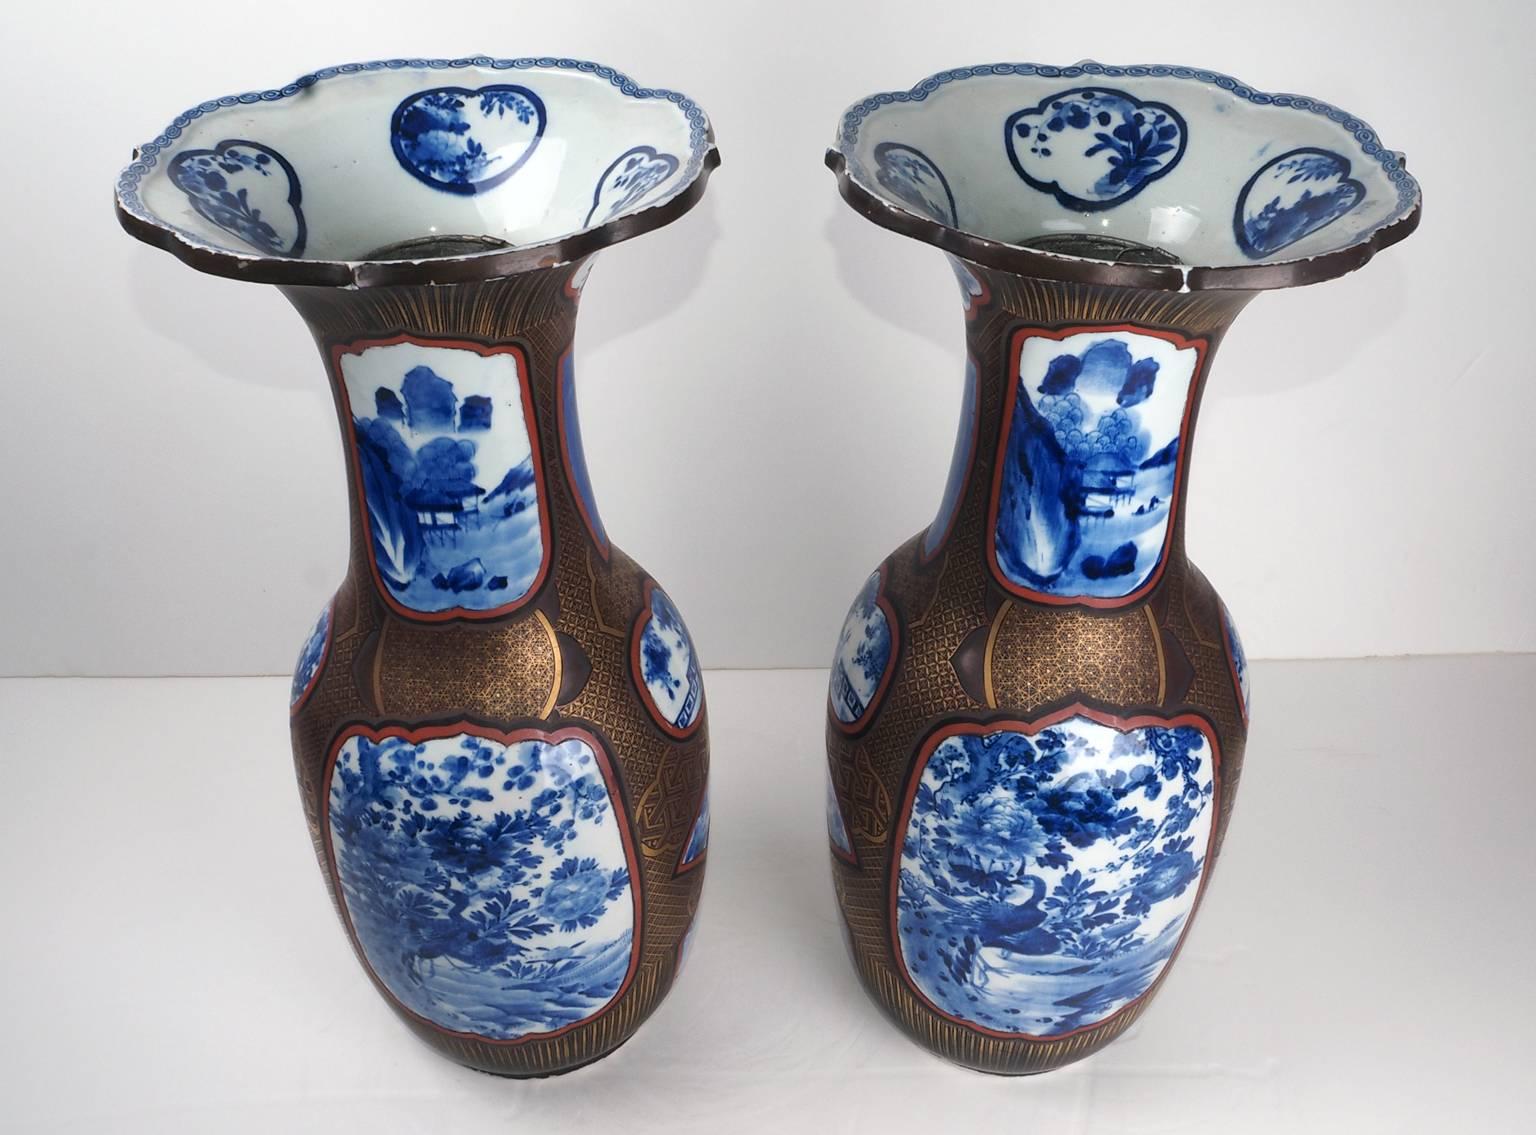 A late 19th century pair of porcelain vases.